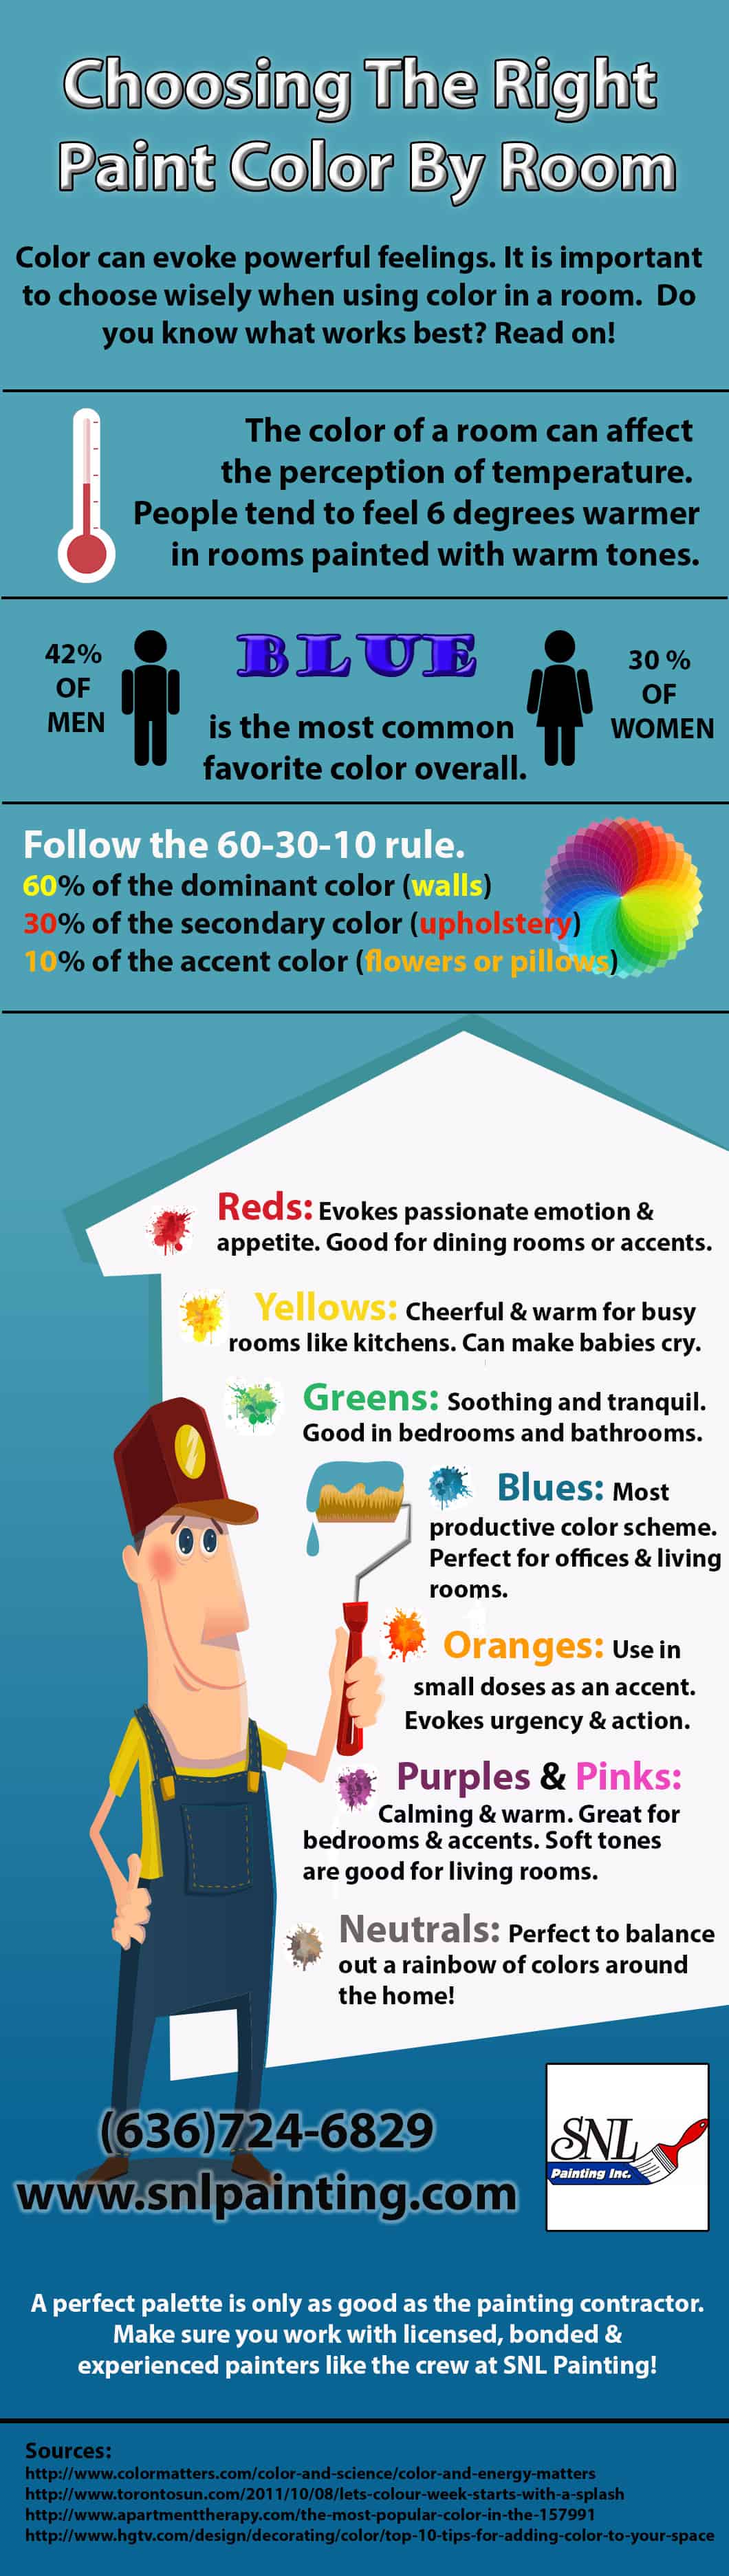 Choosing the right paint color by room infographic